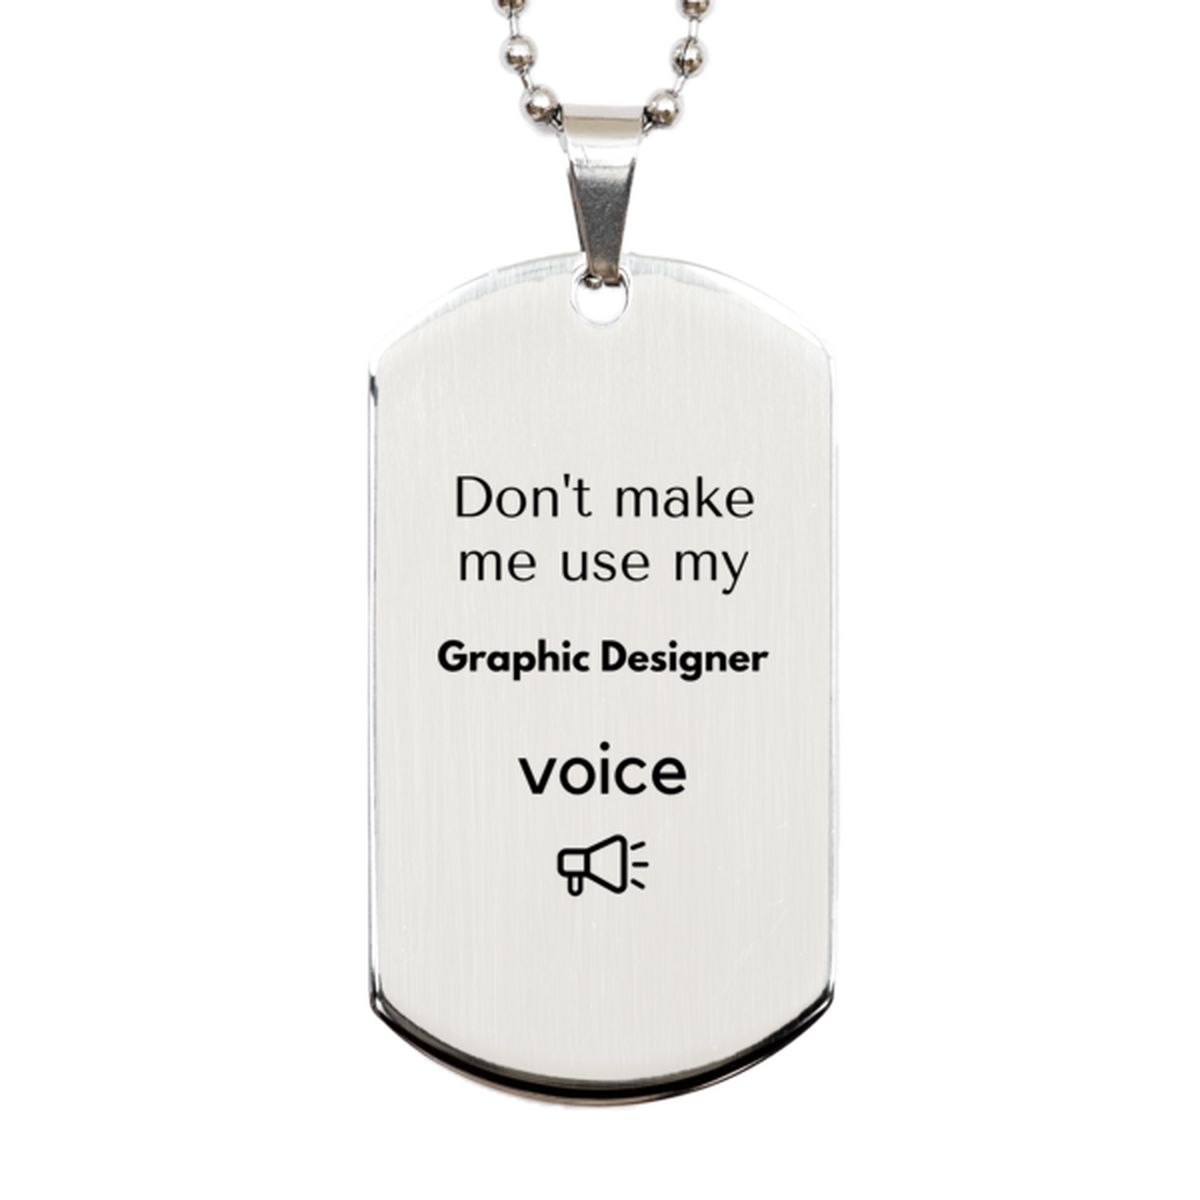 Don't make me use my Graphic Designer voice, Sarcasm Graphic Designer Gifts, Christmas Graphic Designer Silver Dog Tag Birthday Unique Gifts For Graphic Designer Coworkers, Men, Women, Colleague, Friends